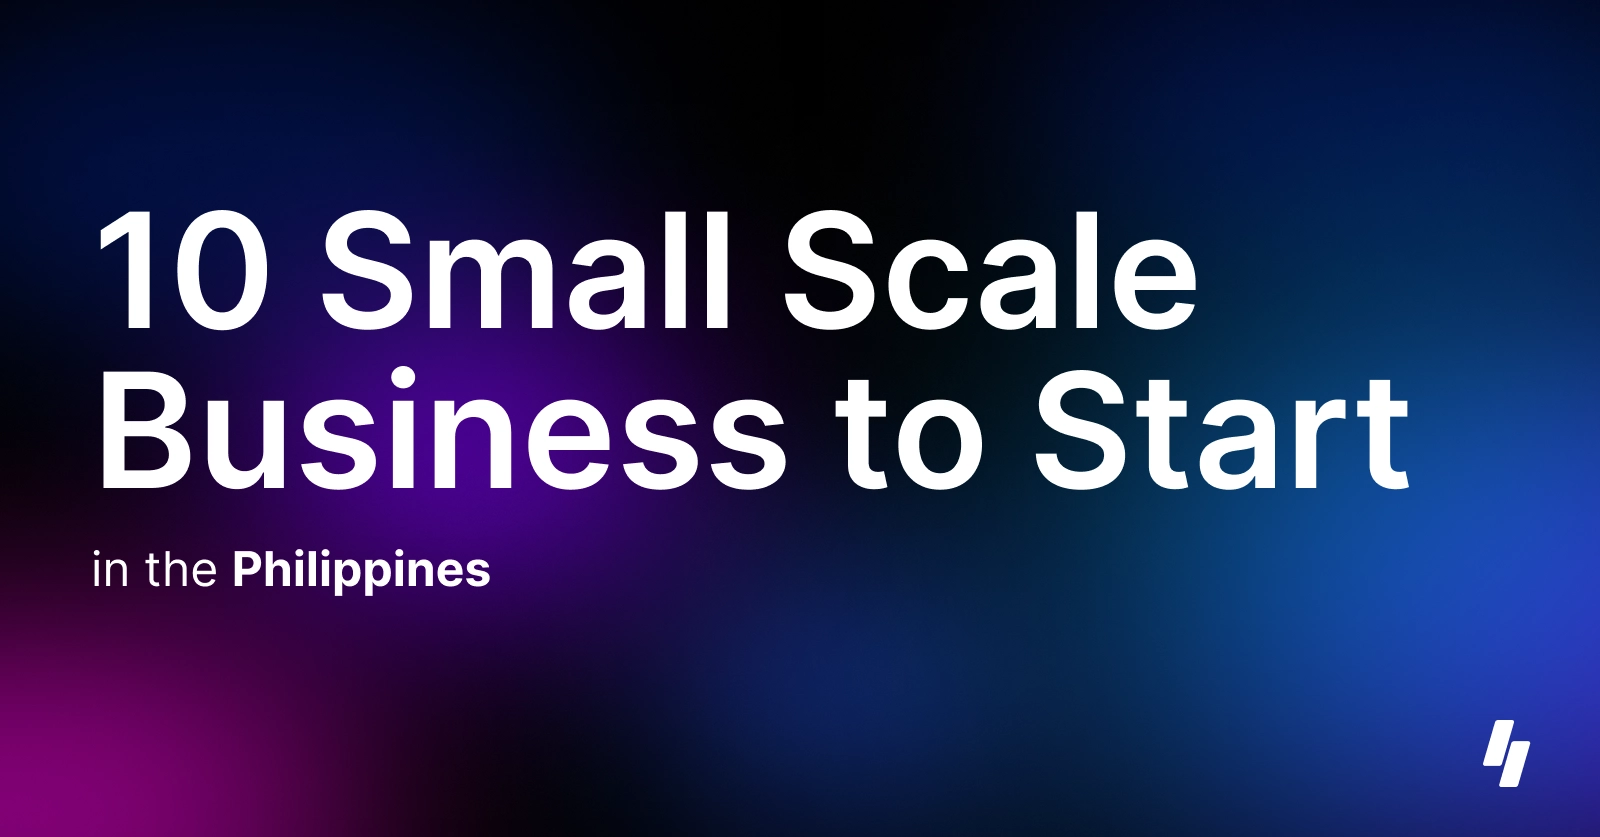 10 Small Scale Business to Start in the Philippines